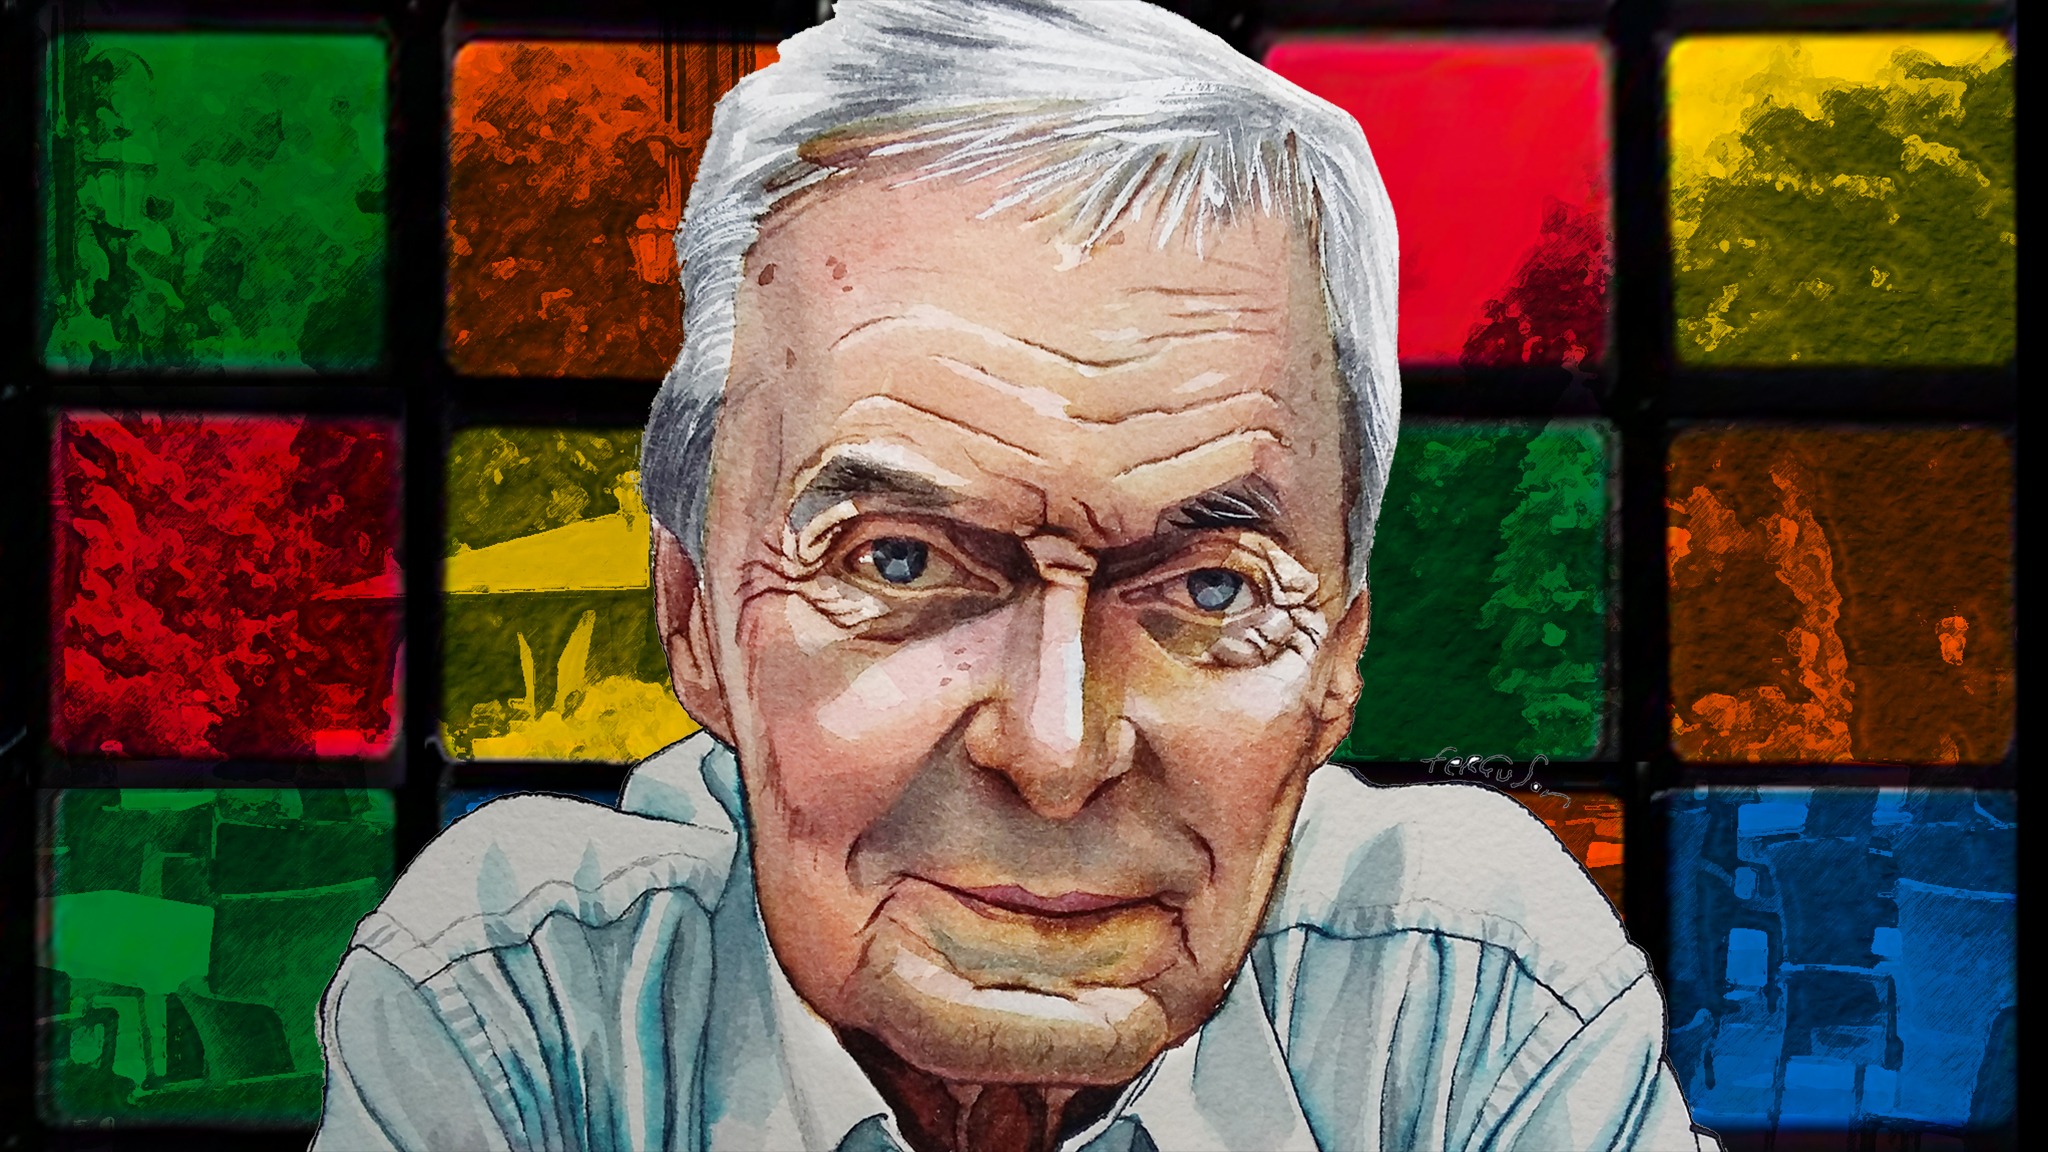 Erno Rubik: 'The Cube has his own voice' |